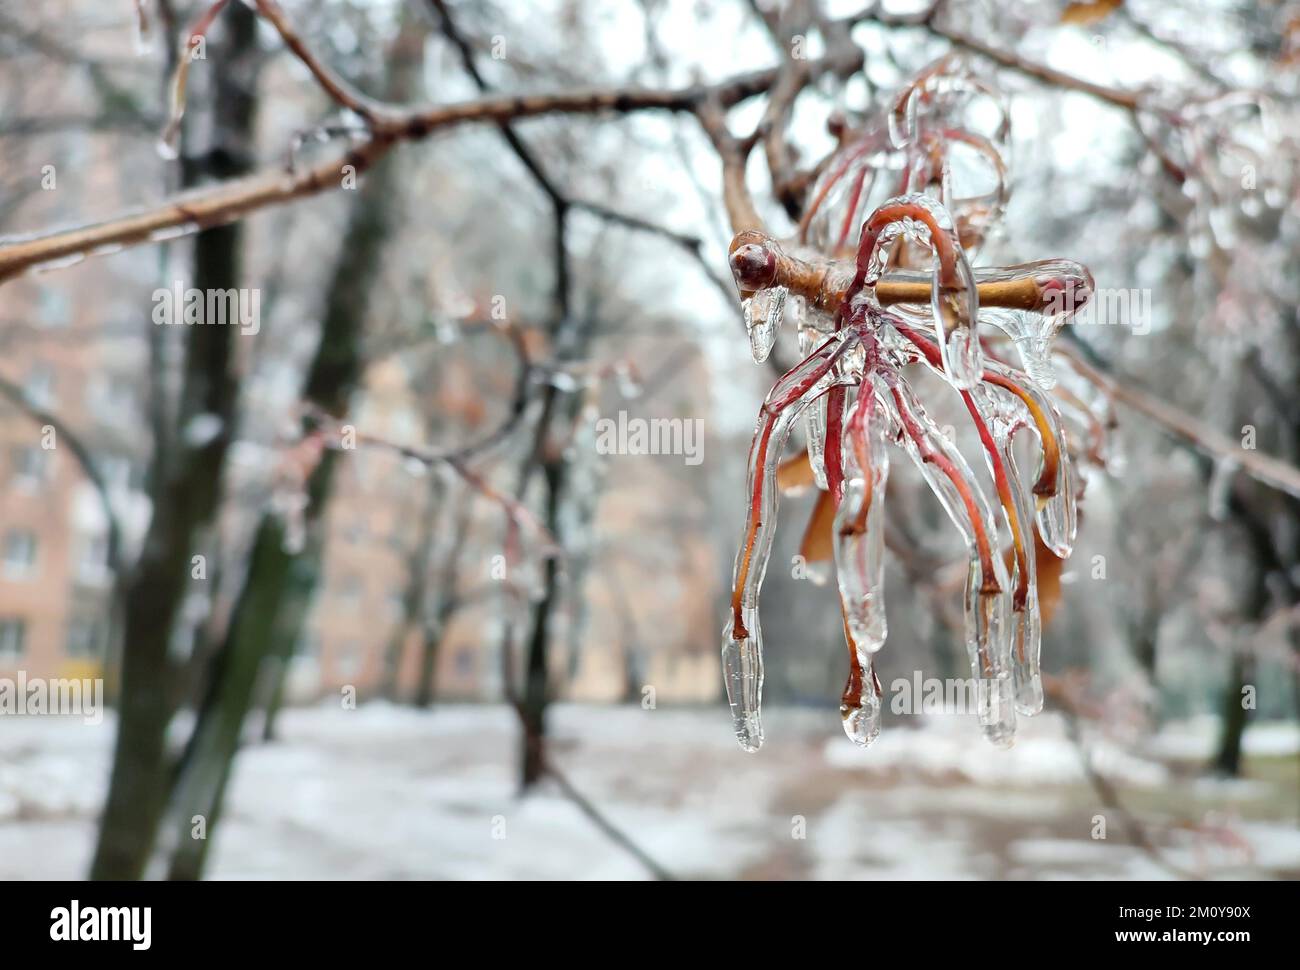 Branches of bush covered with ice after rain in frost in winter close-up. Frozen plants. After icy rain. Freezing rain. frozen raindrops, cold, ice, icy, frosty. Natural phenomenon. Natural background Stock Photo